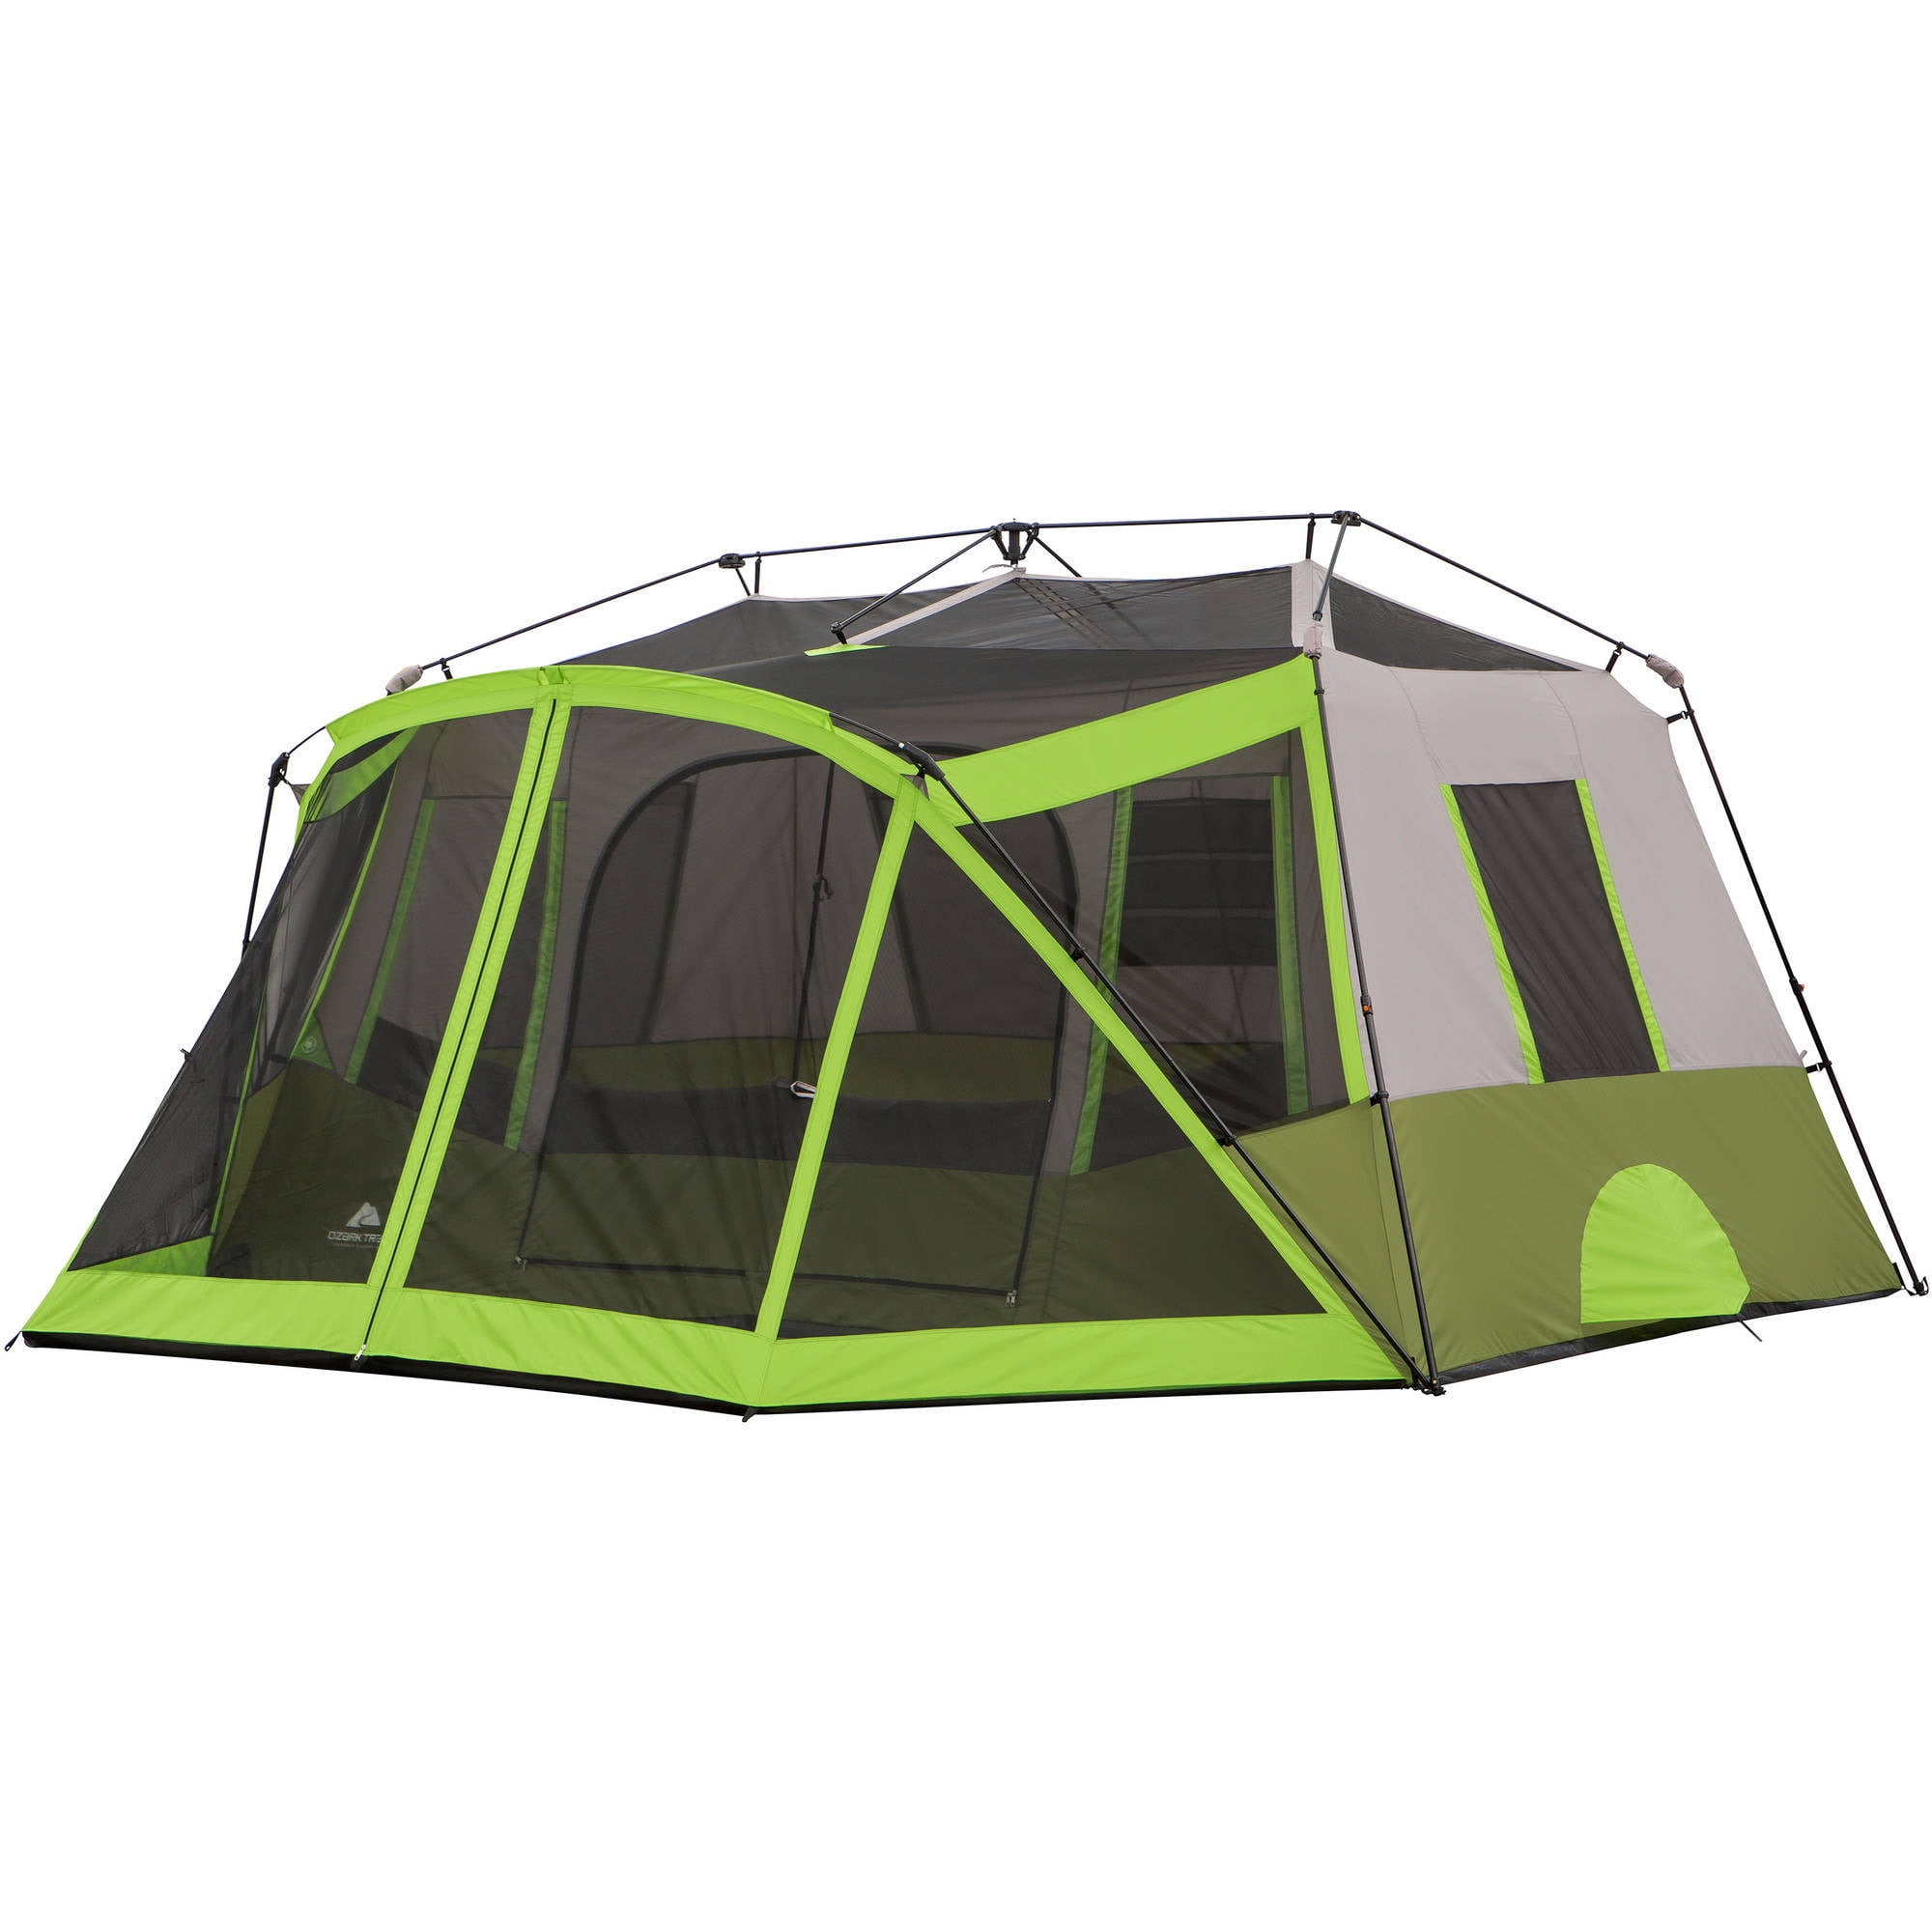 Ozark Trail 9 Person 2 Room Instant Cabin Tent with Screen Room eBay